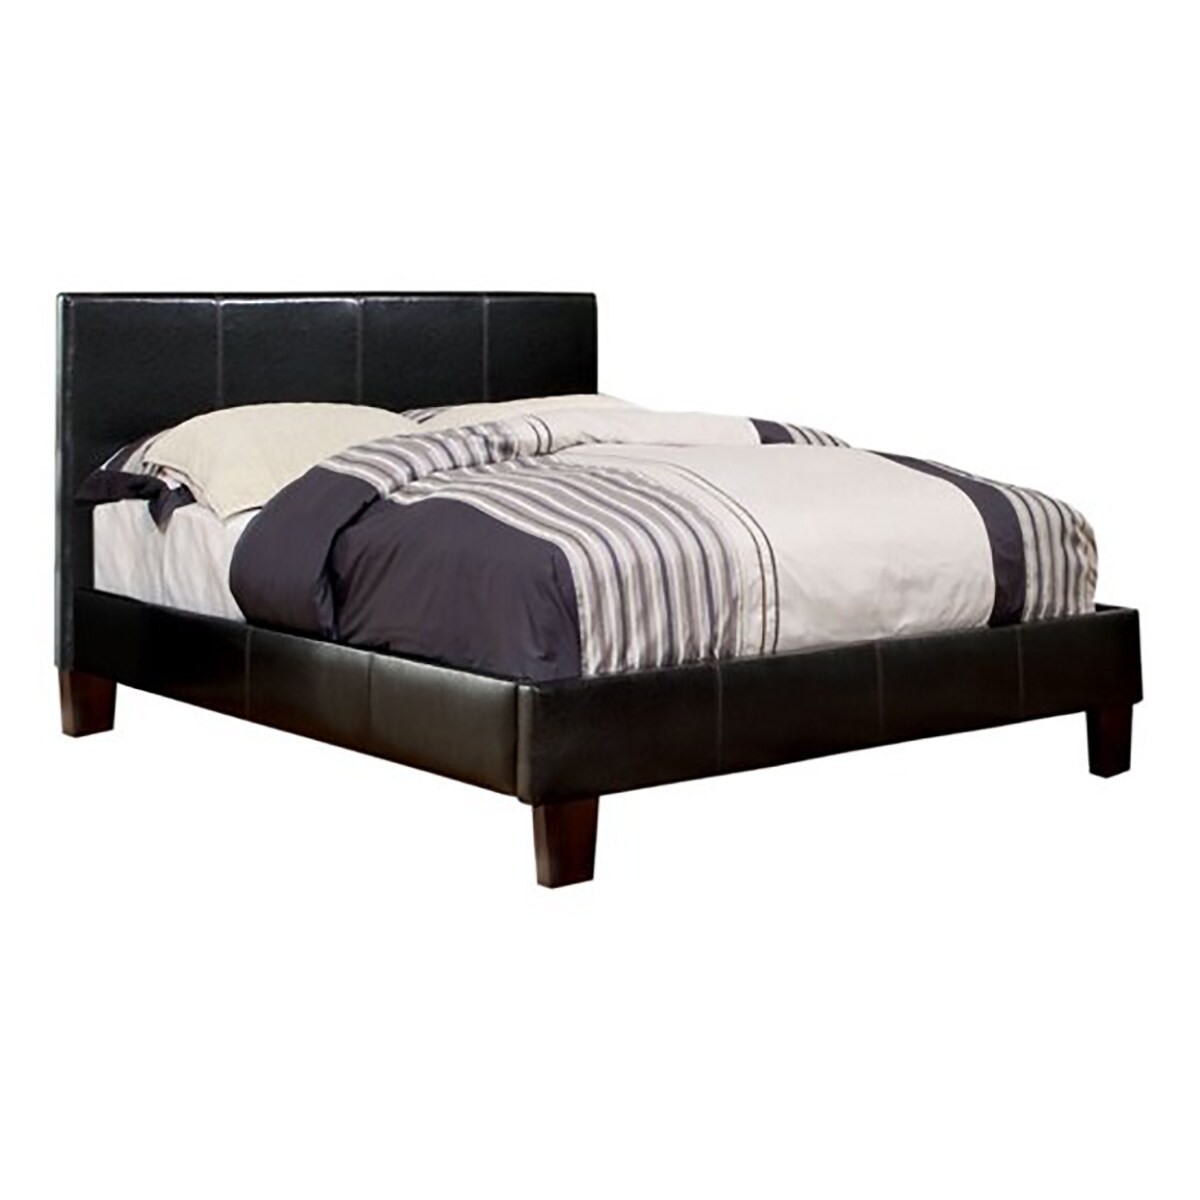 Sky Valley Espresso Queen Wood Platform Bed Leather in Brown | - Furniture of America IDF-7008EX-Q